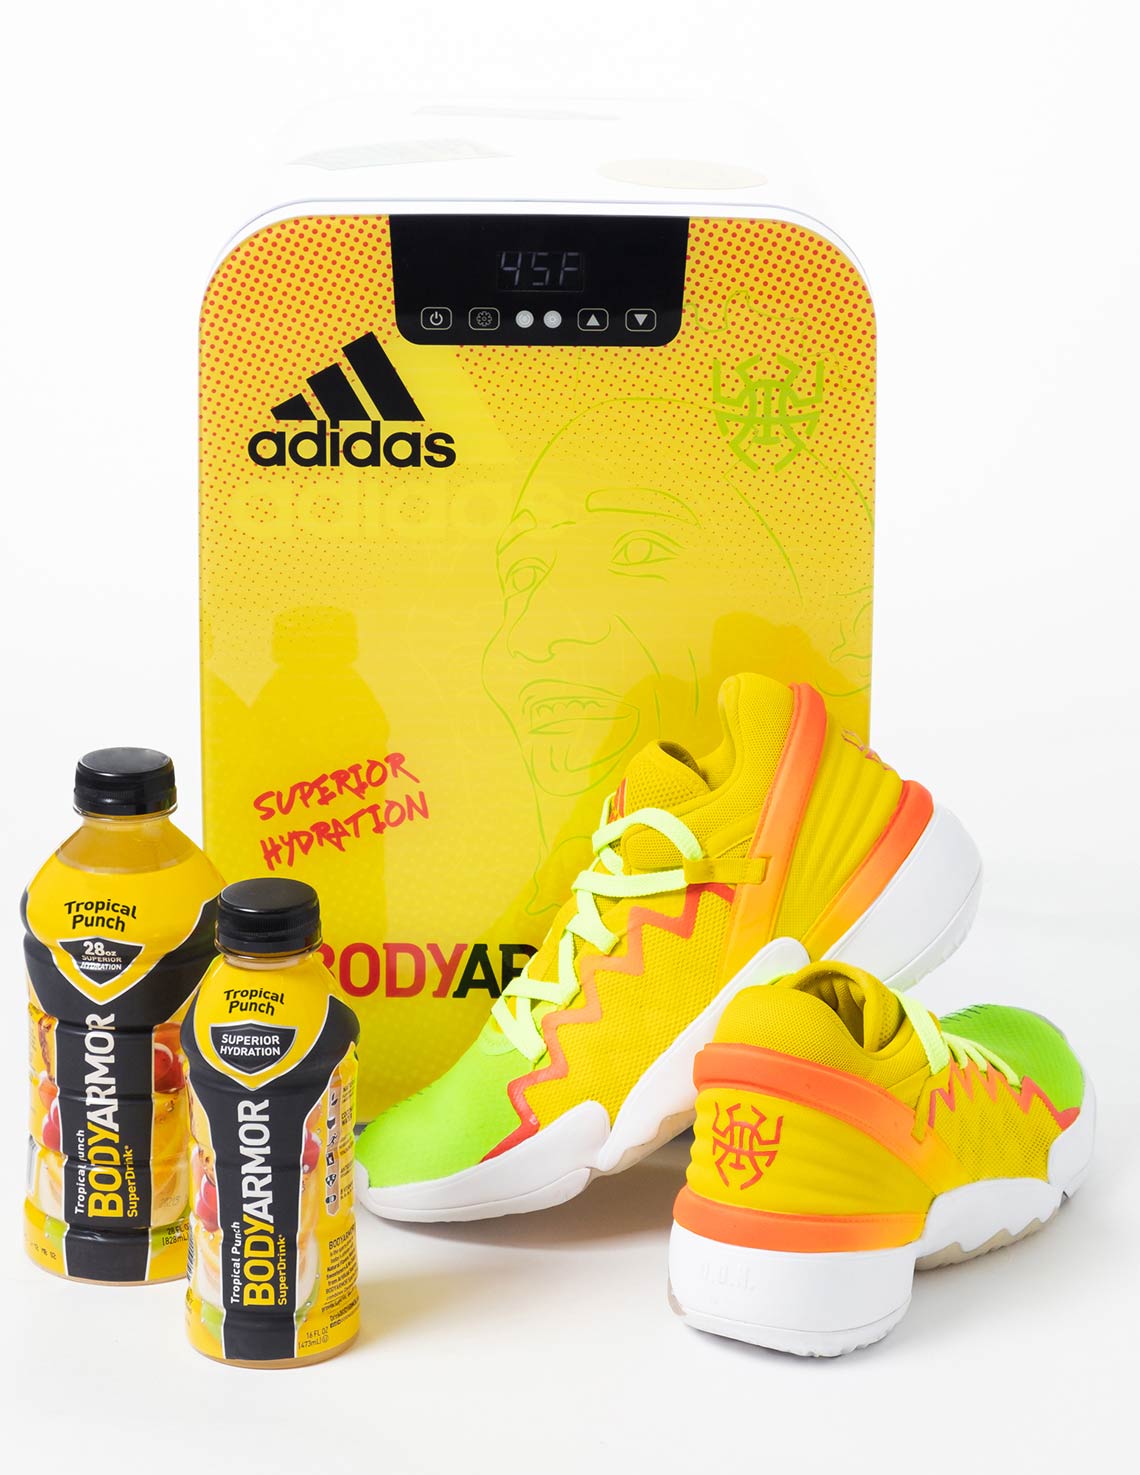 Bodyarmor Adidas Don Issue 2 Release Info 2